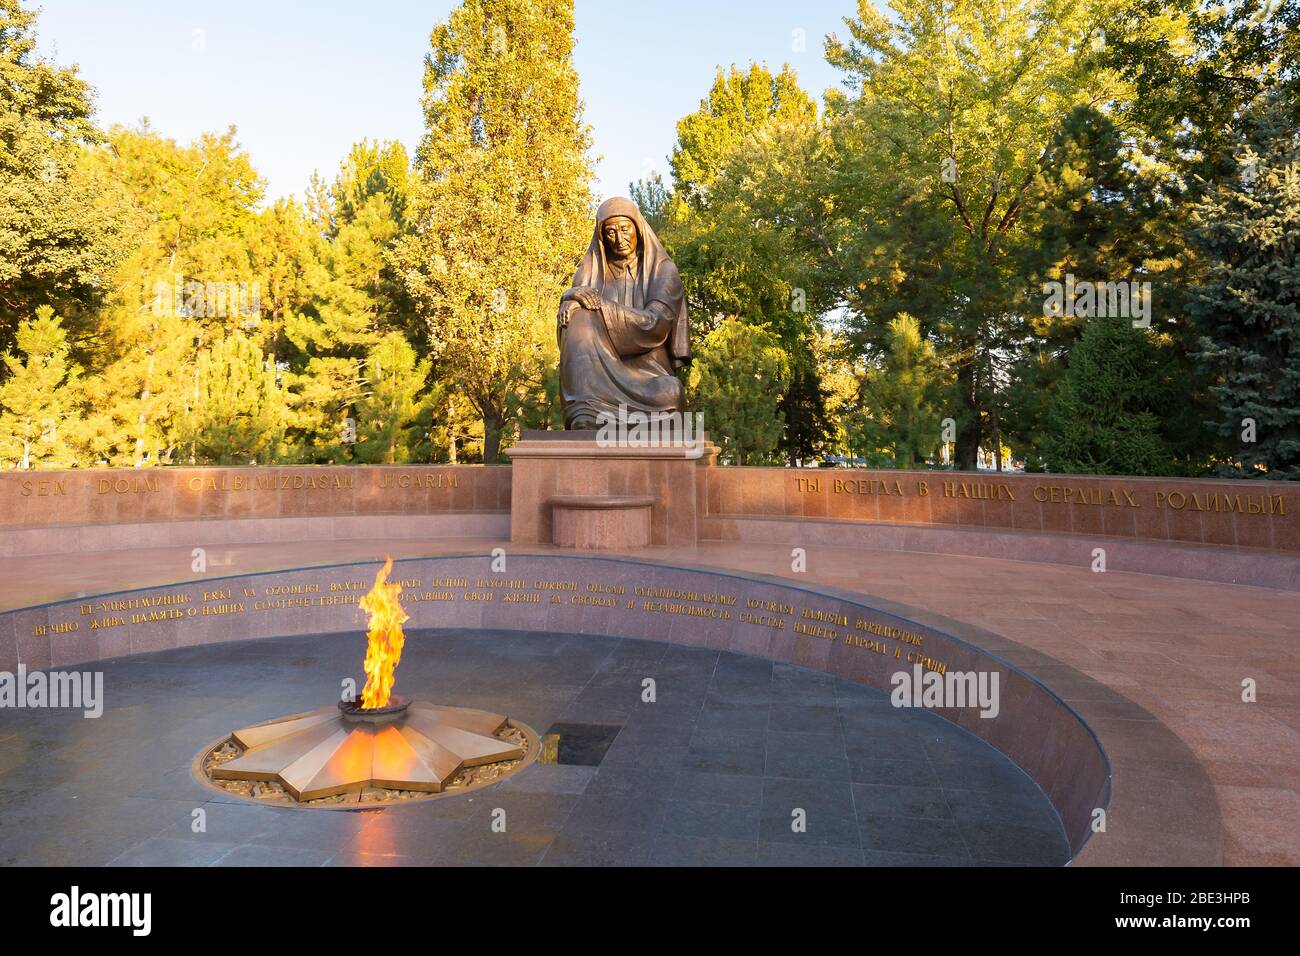 Eternal Flame monument in Mustaqillik Maydoni Square in Tashkent, Uzbekistan. Tomb of the Unknown Soldier in Square of memory and Honor. Eternal fire. Stock Photo